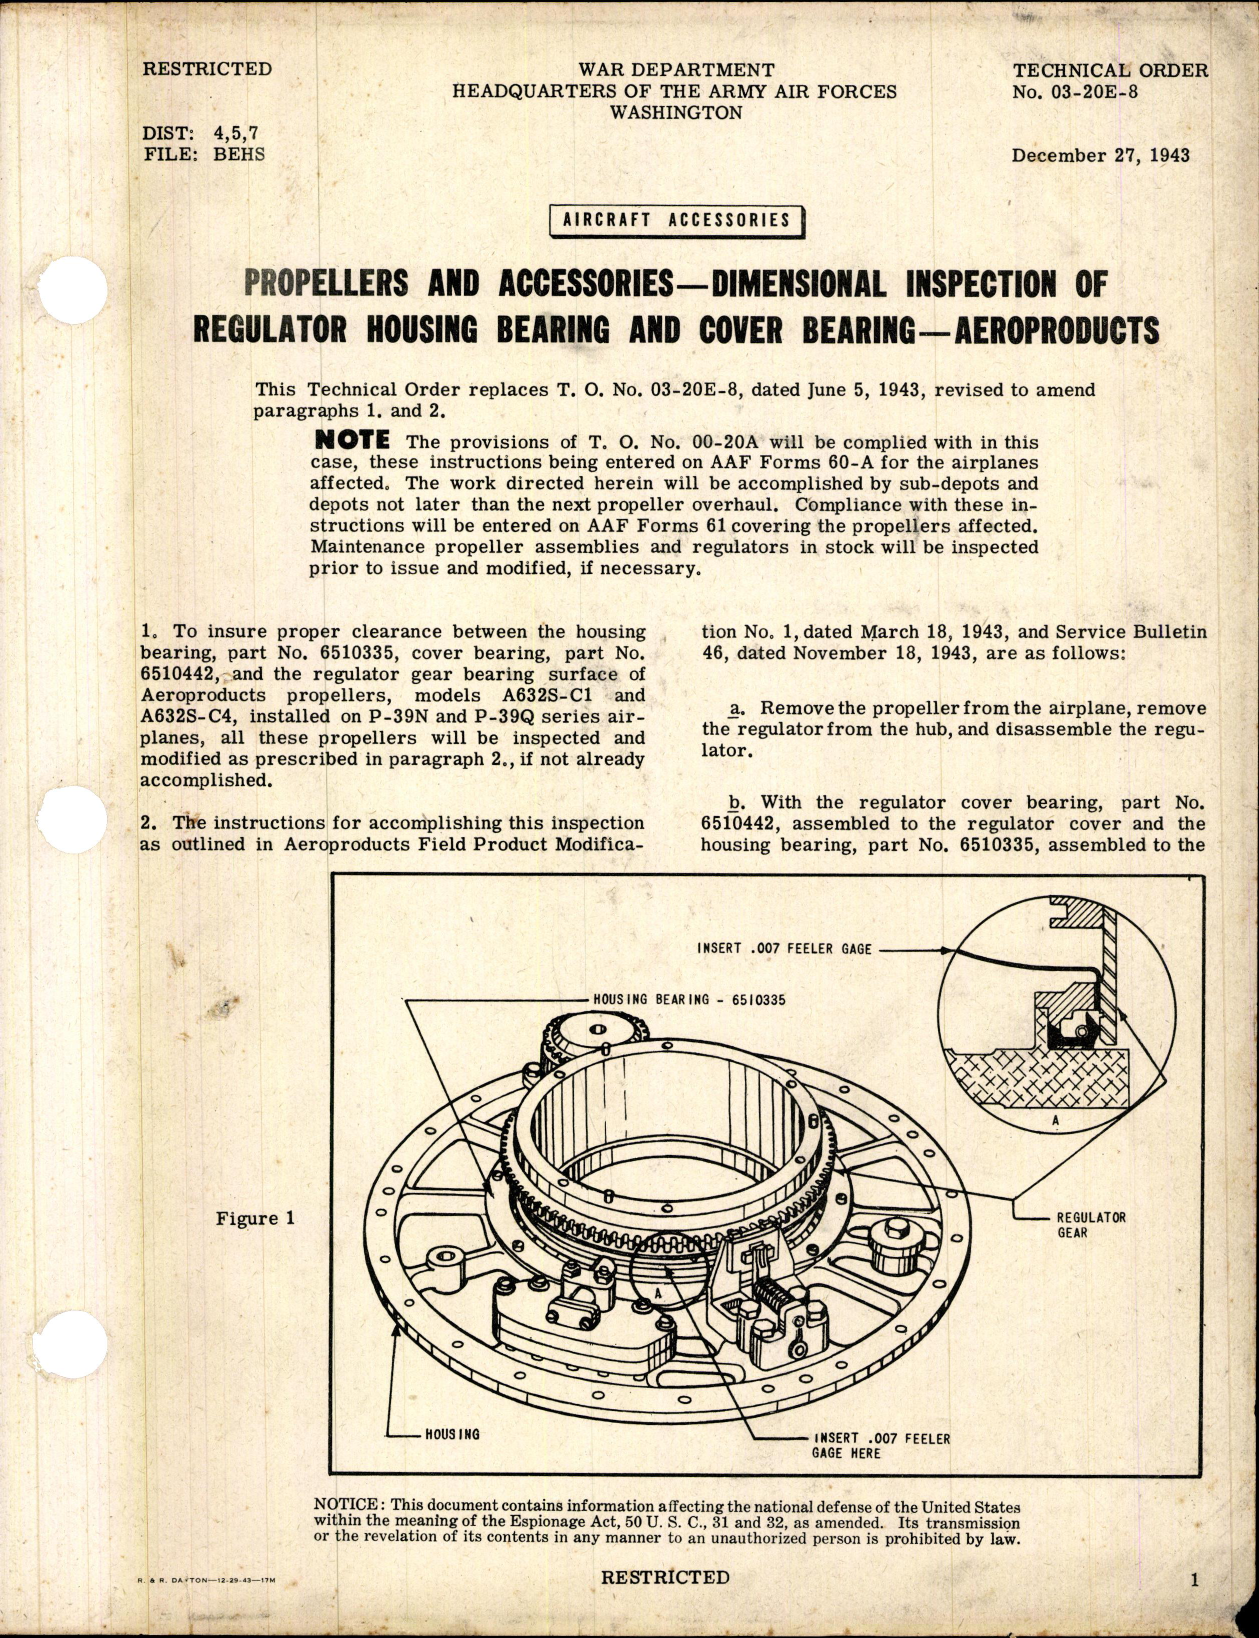 Sample page 1 from AirCorps Library document: Propellers and Accessories, Dimensional Inspection of Regulator Housing Bearing and Cover Bearing